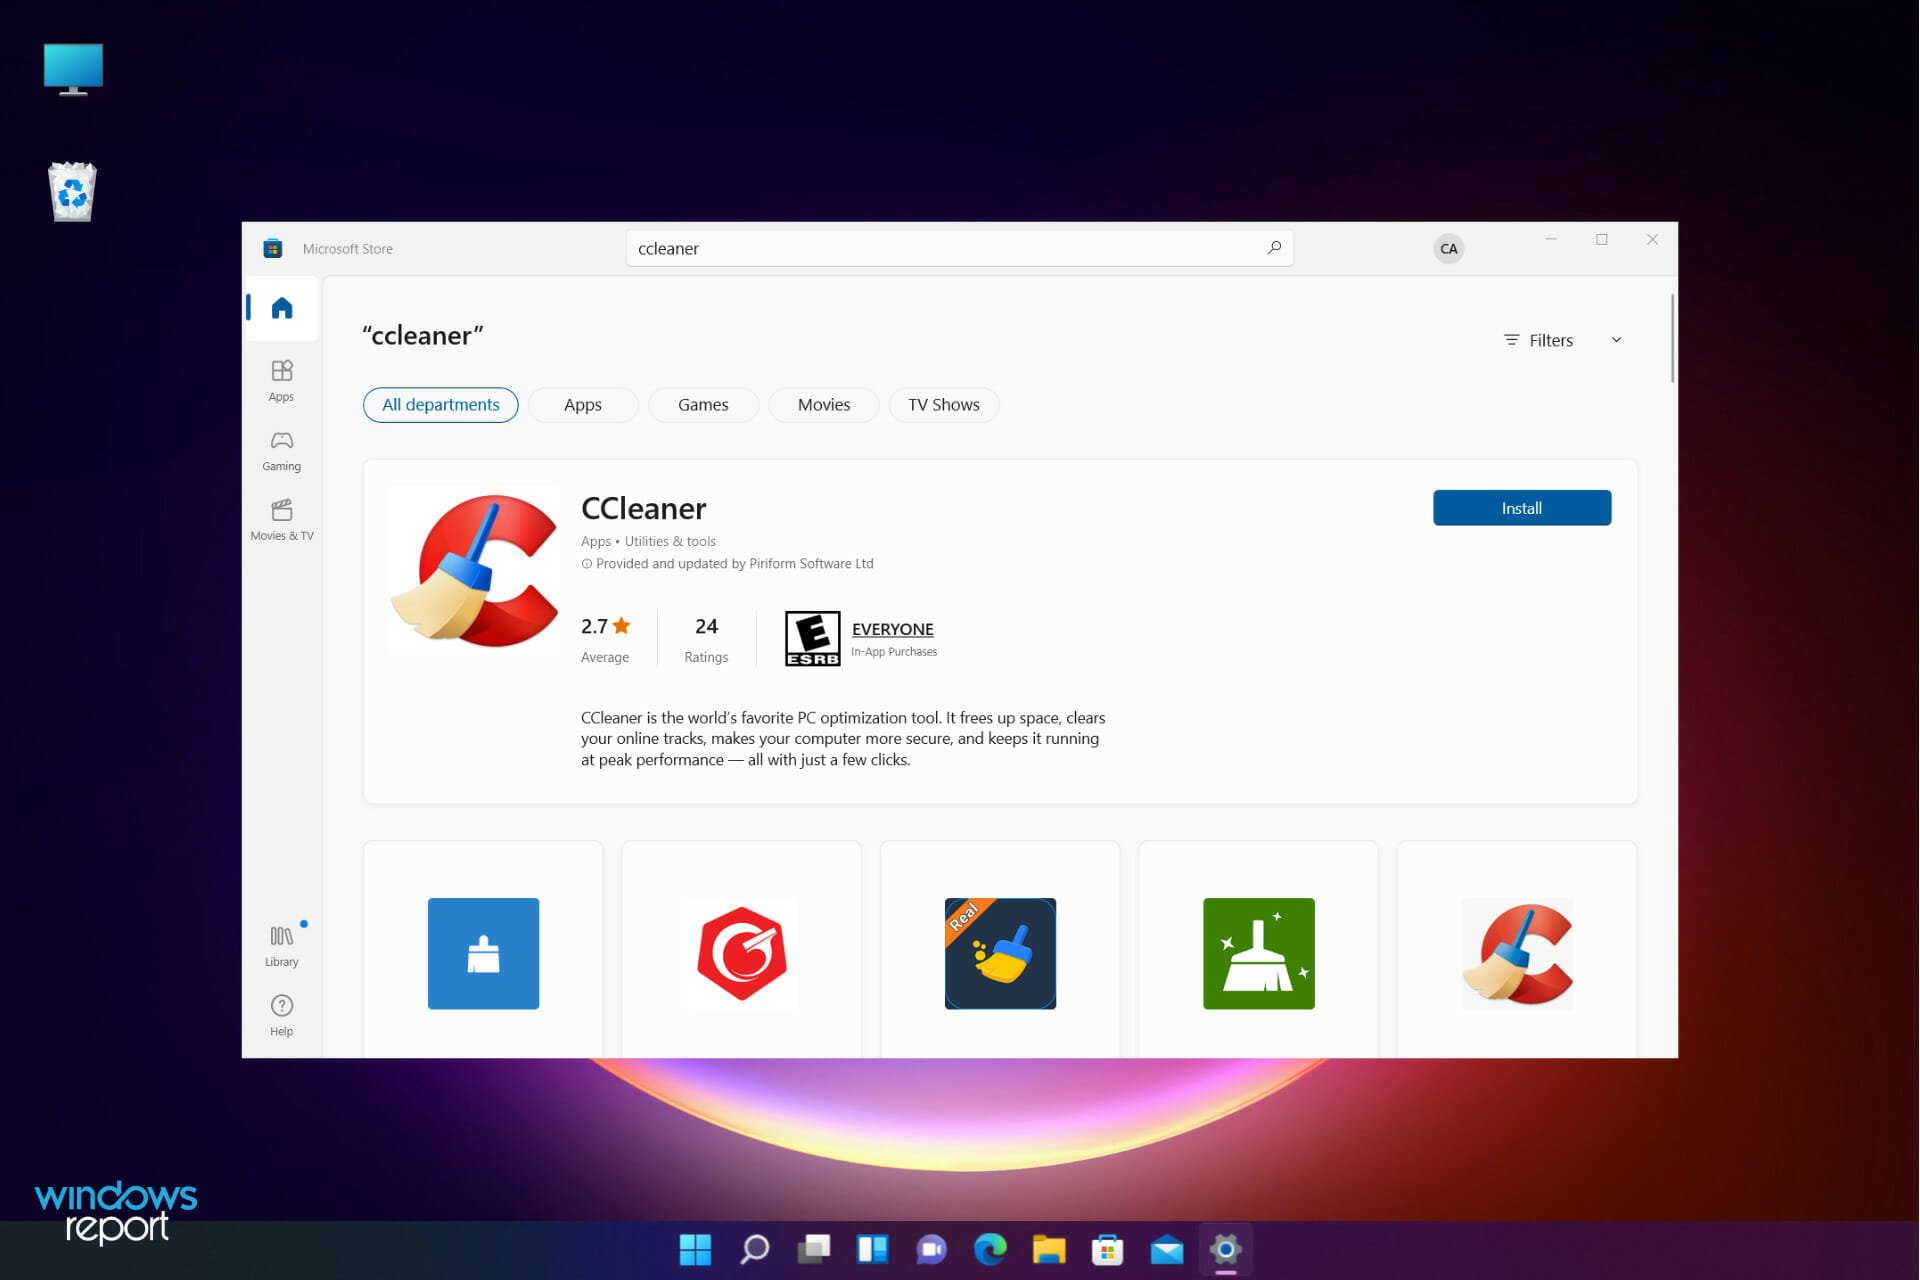 CCleaner comes to Microsoft Store after long fight